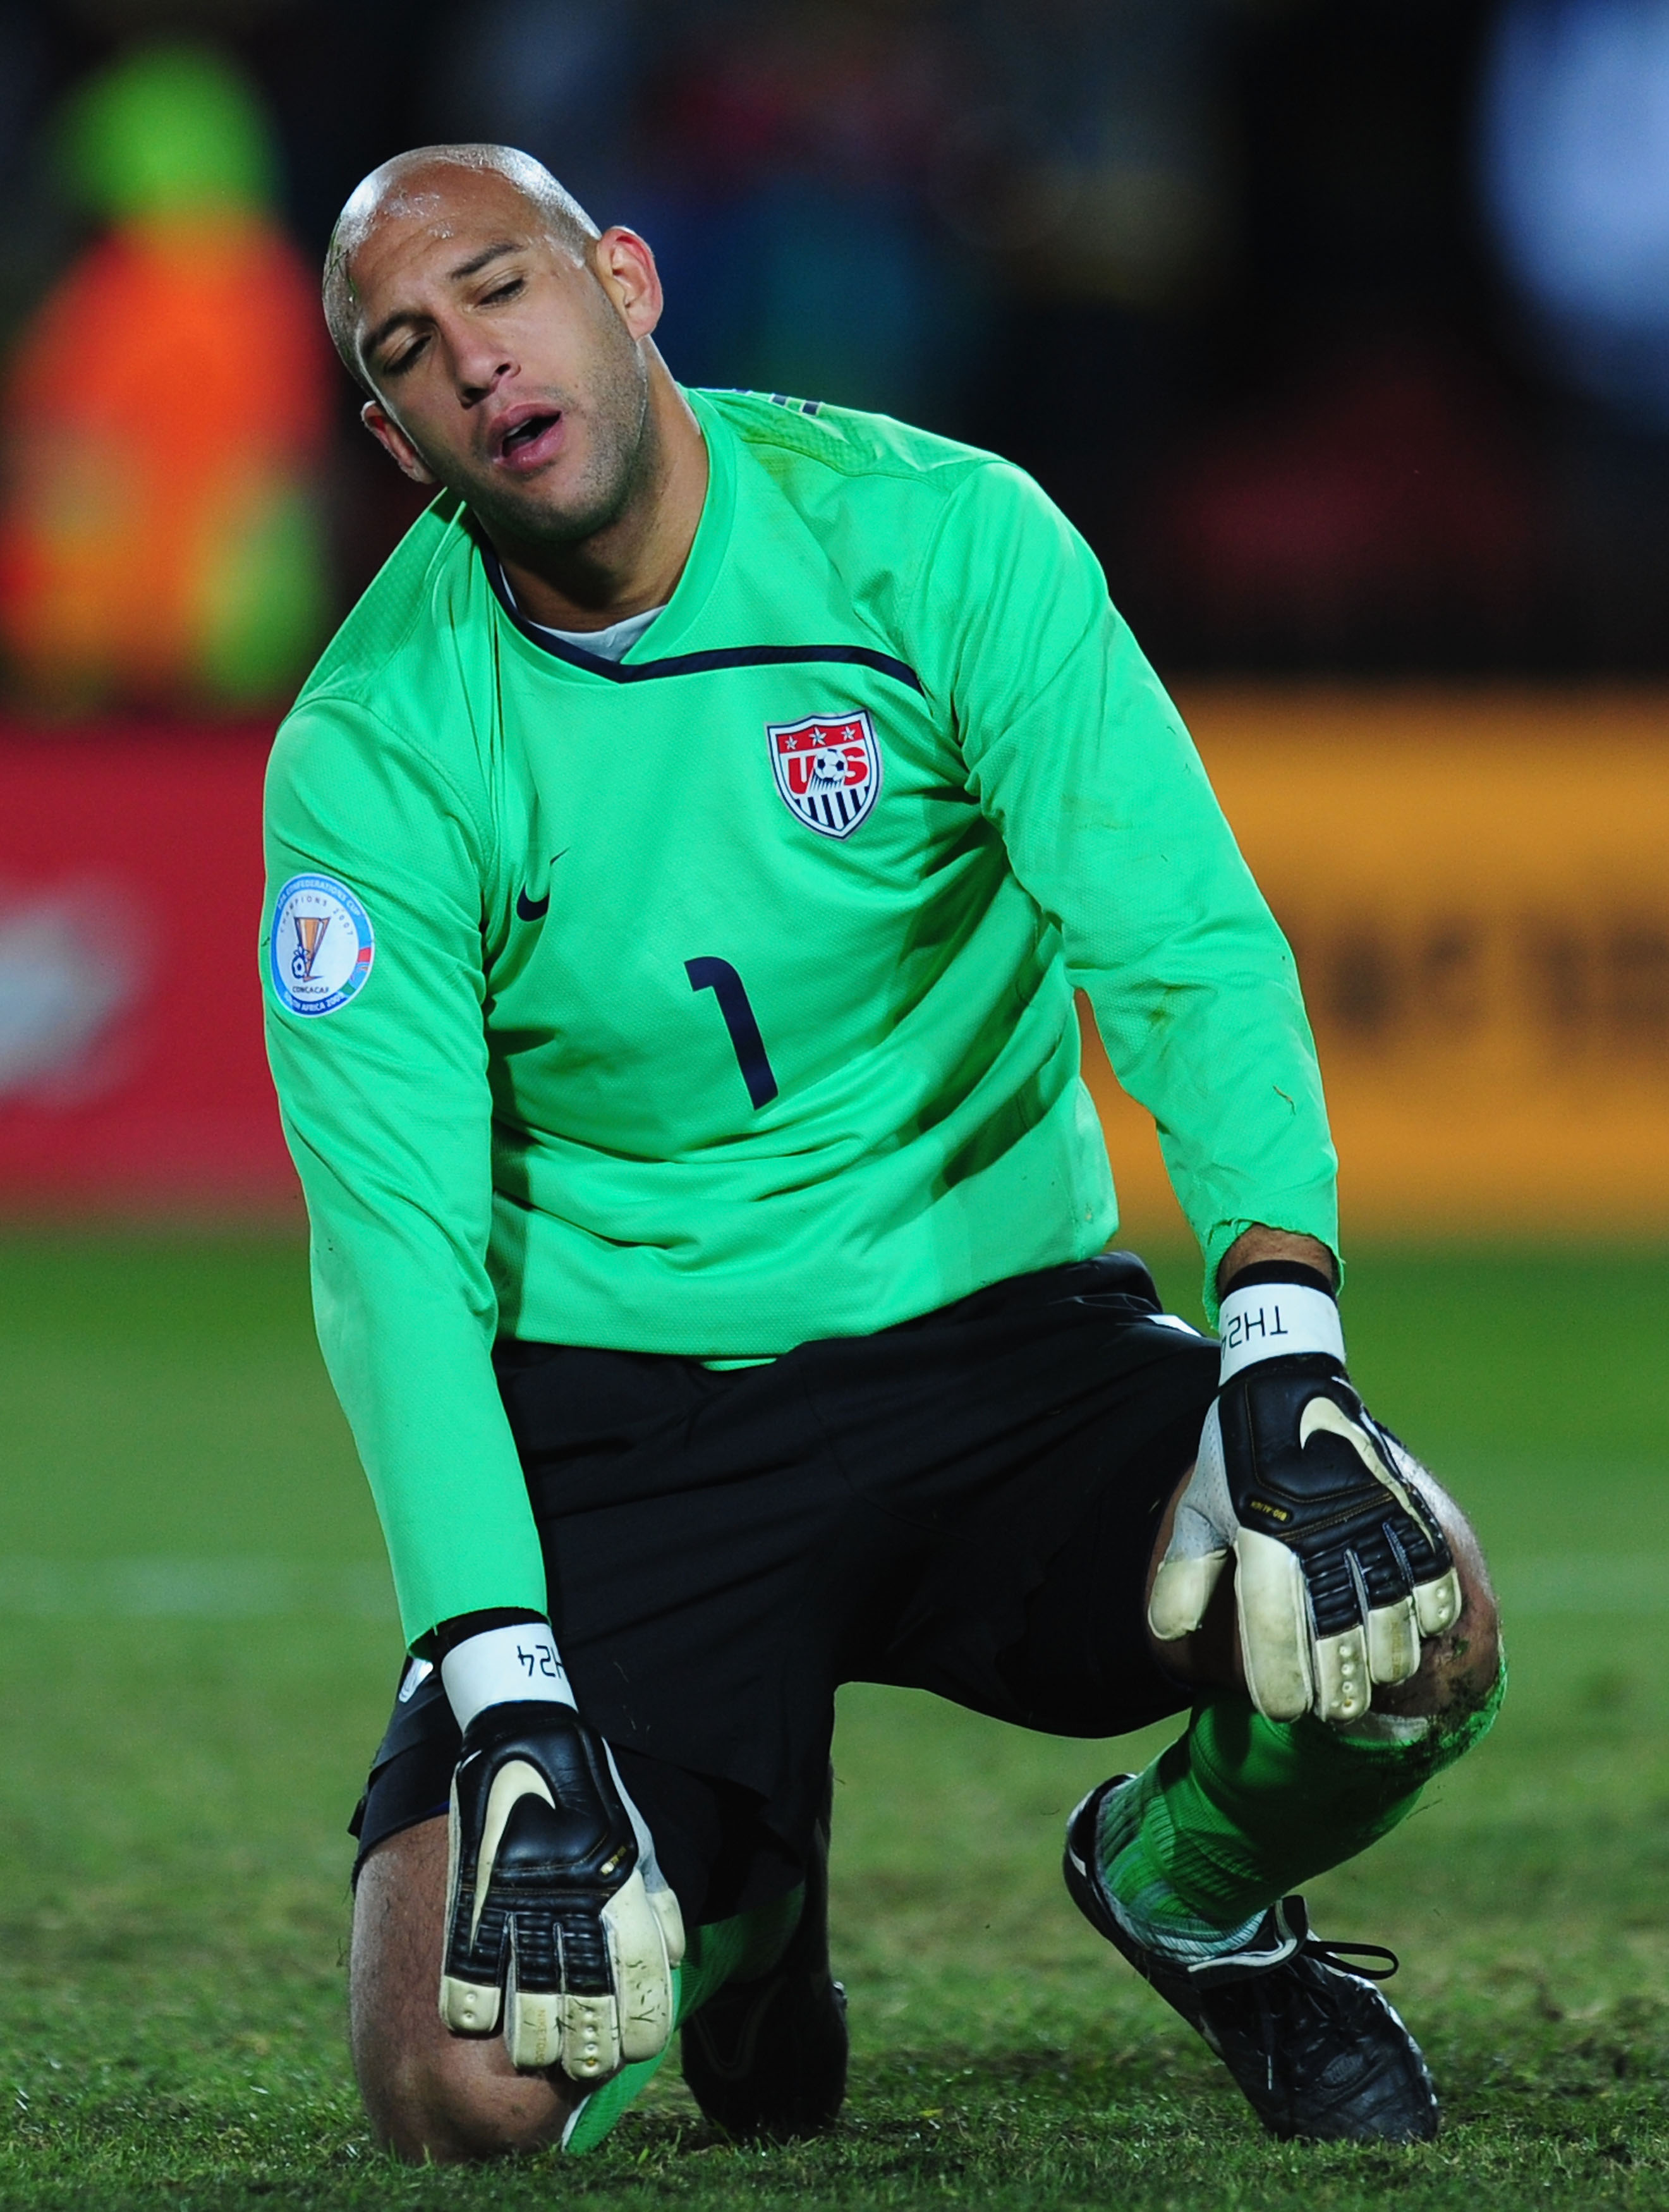 JOHANNESBURG, SOUTH AFRICA - JUNE 28:  Tim Howard of USA shows his dejection during the FIFA Confederations Cup Final between USA and Brazil at the Ellis Park Stadium on June 28, 2009 in Johannesburg, South Africa.  (Photo by Laurence Griffiths/Getty Imag